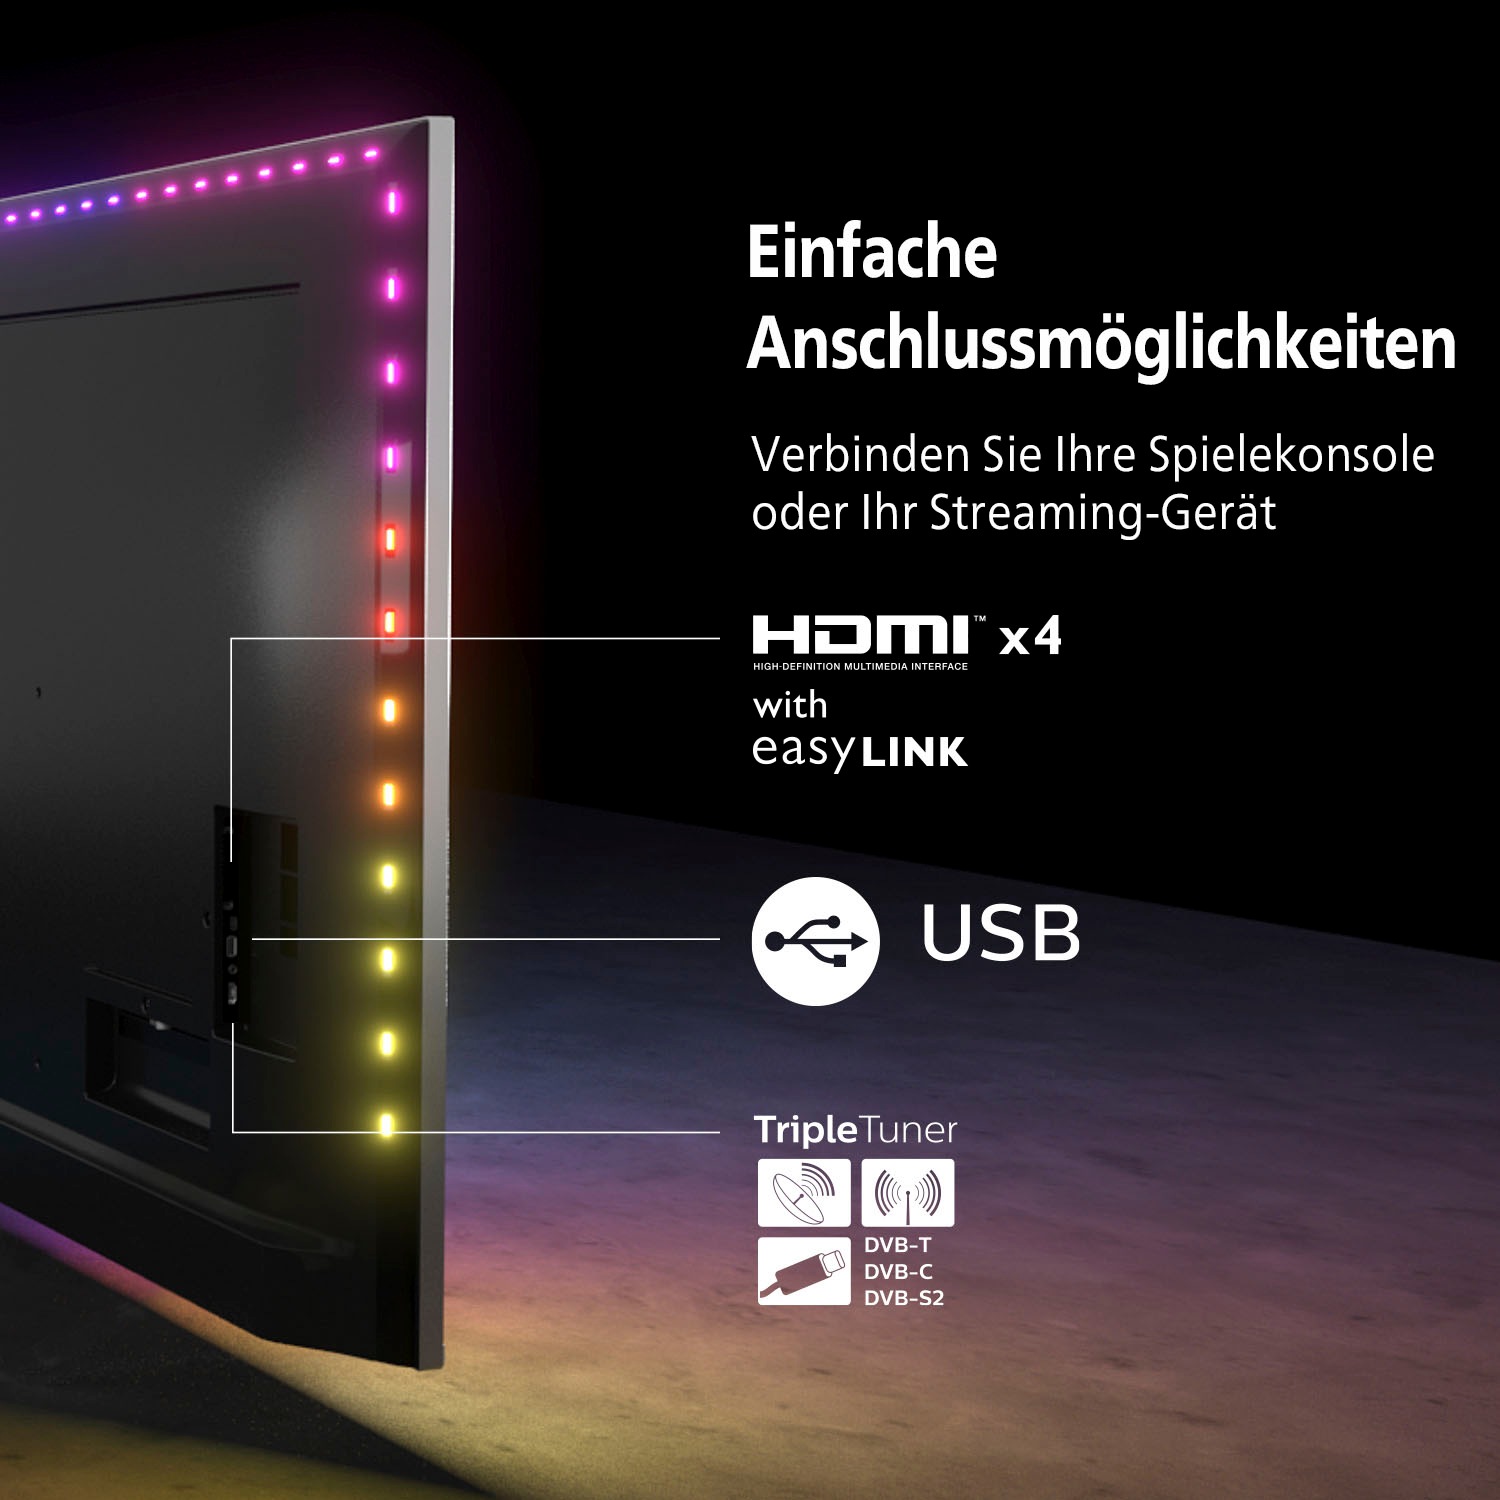 Philips LED-Fernseher »70PUS8007/12«, 177 cm/70 Zoll, 4K Ultra HD, Android  TV-Smart-TV | BAUR